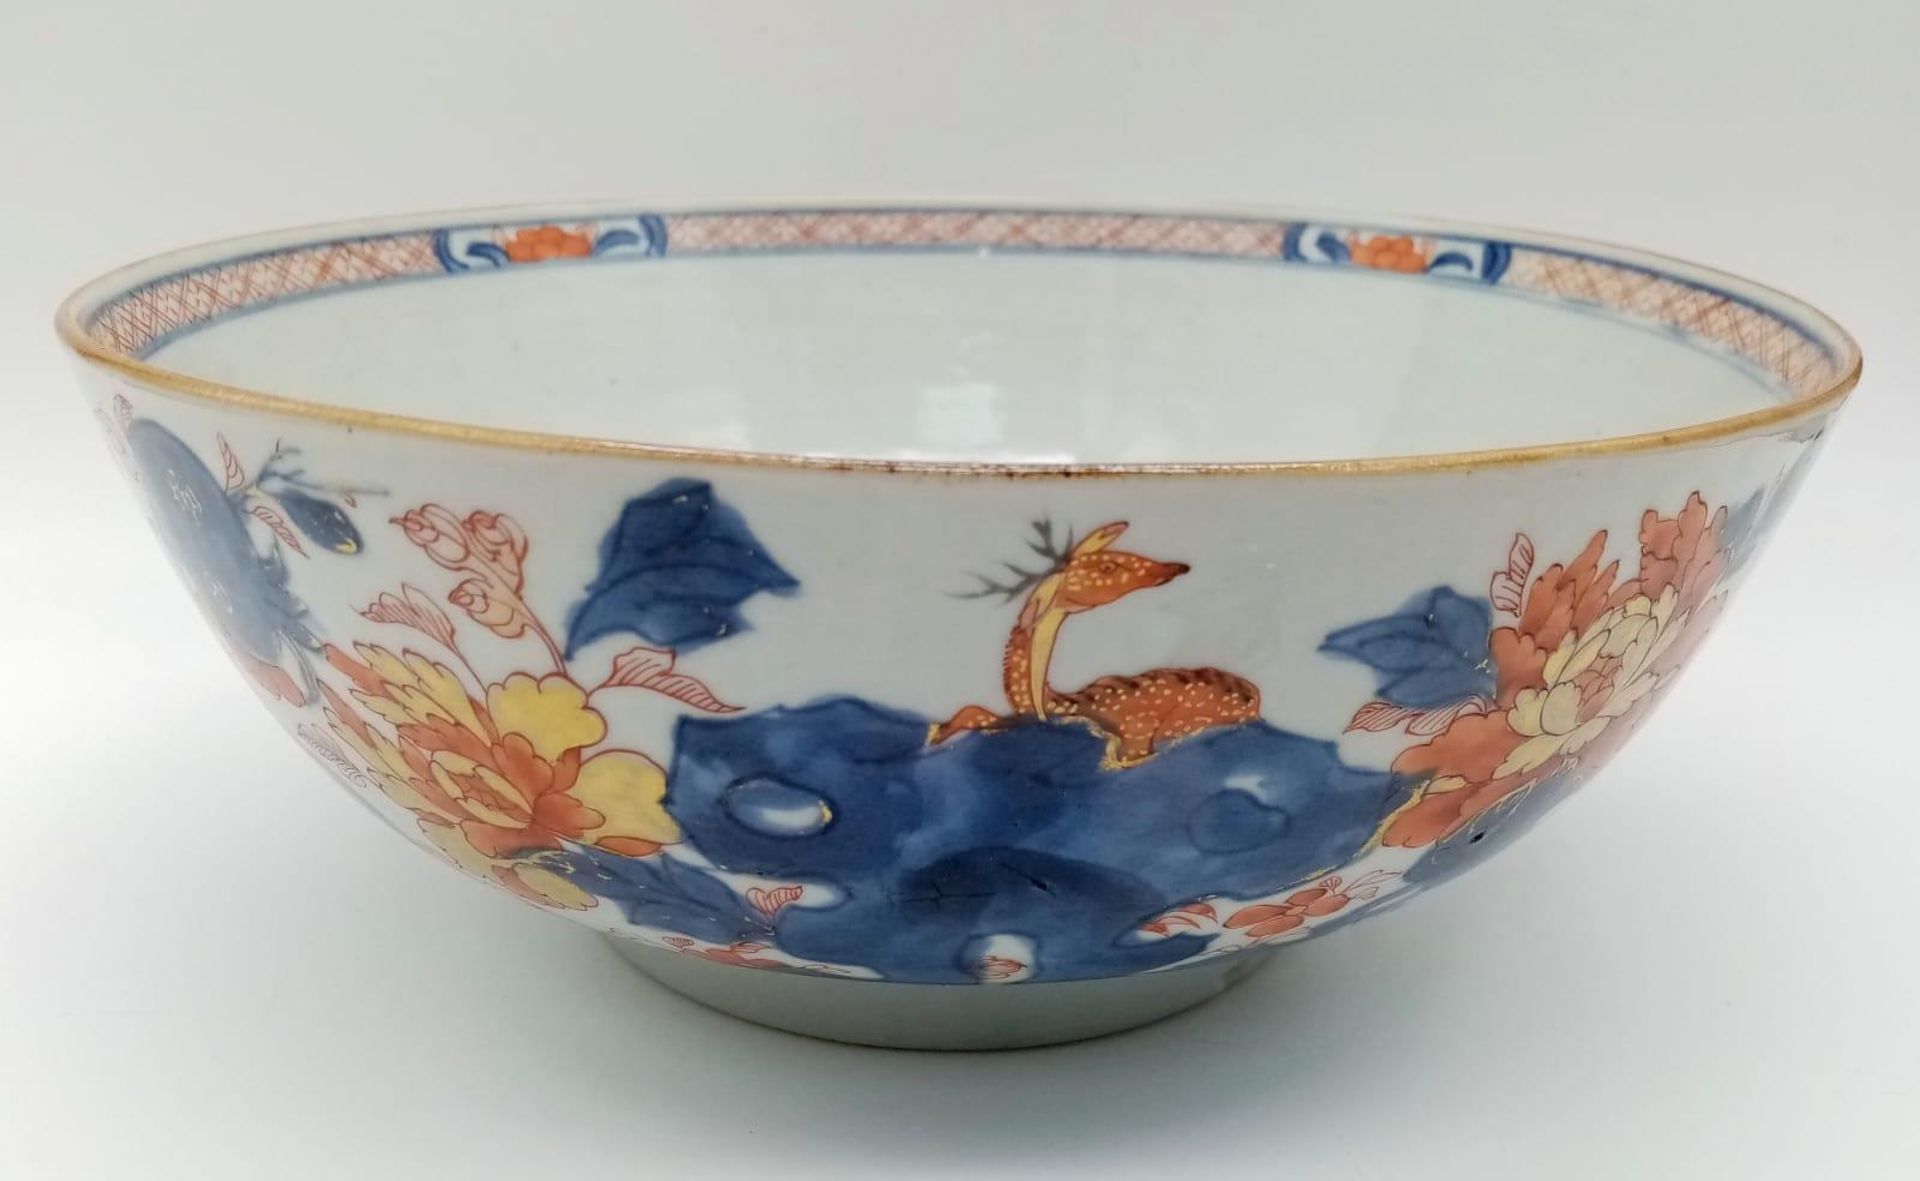 AN 18TH CENTURY CHINESE EXPORT LARGE BOWL, DECORATED IN THE YONGZHENG PERIOD WITH BRANCHES AND